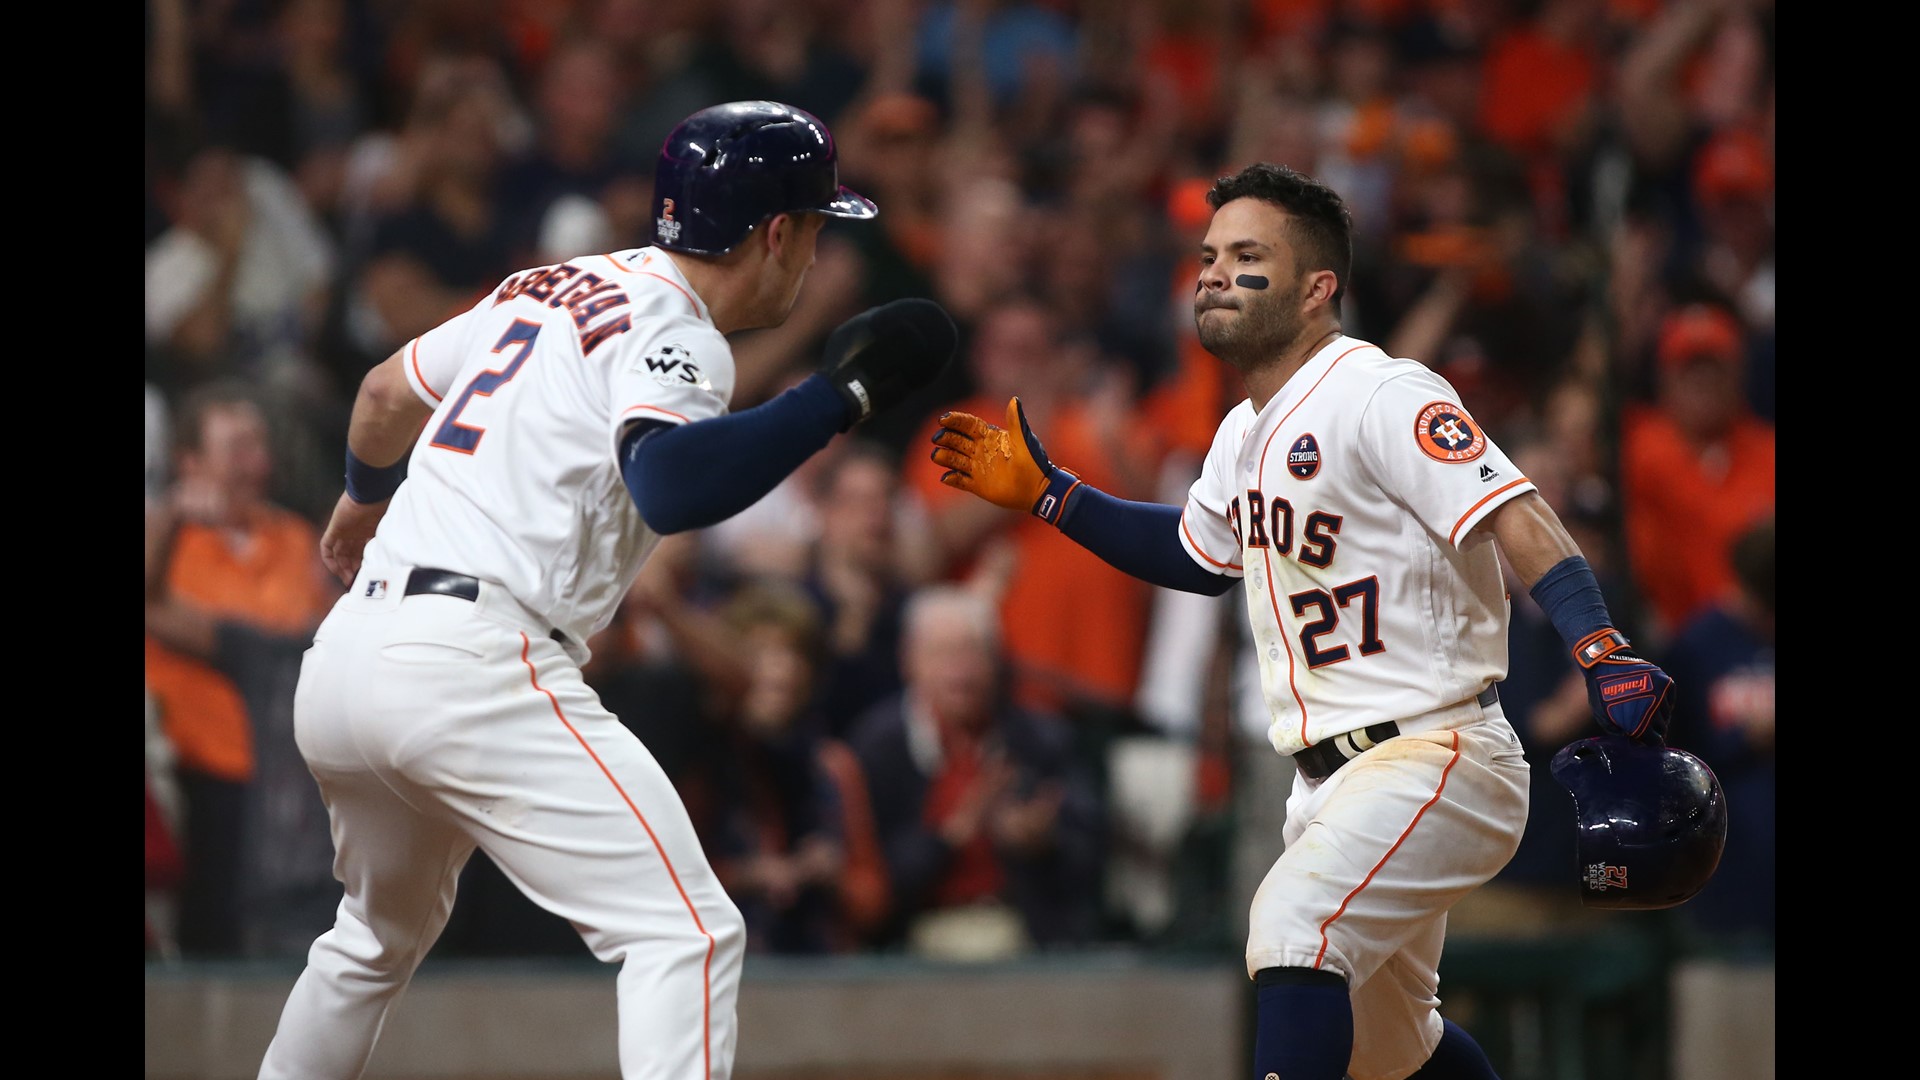 Astros' home opener What you need to know